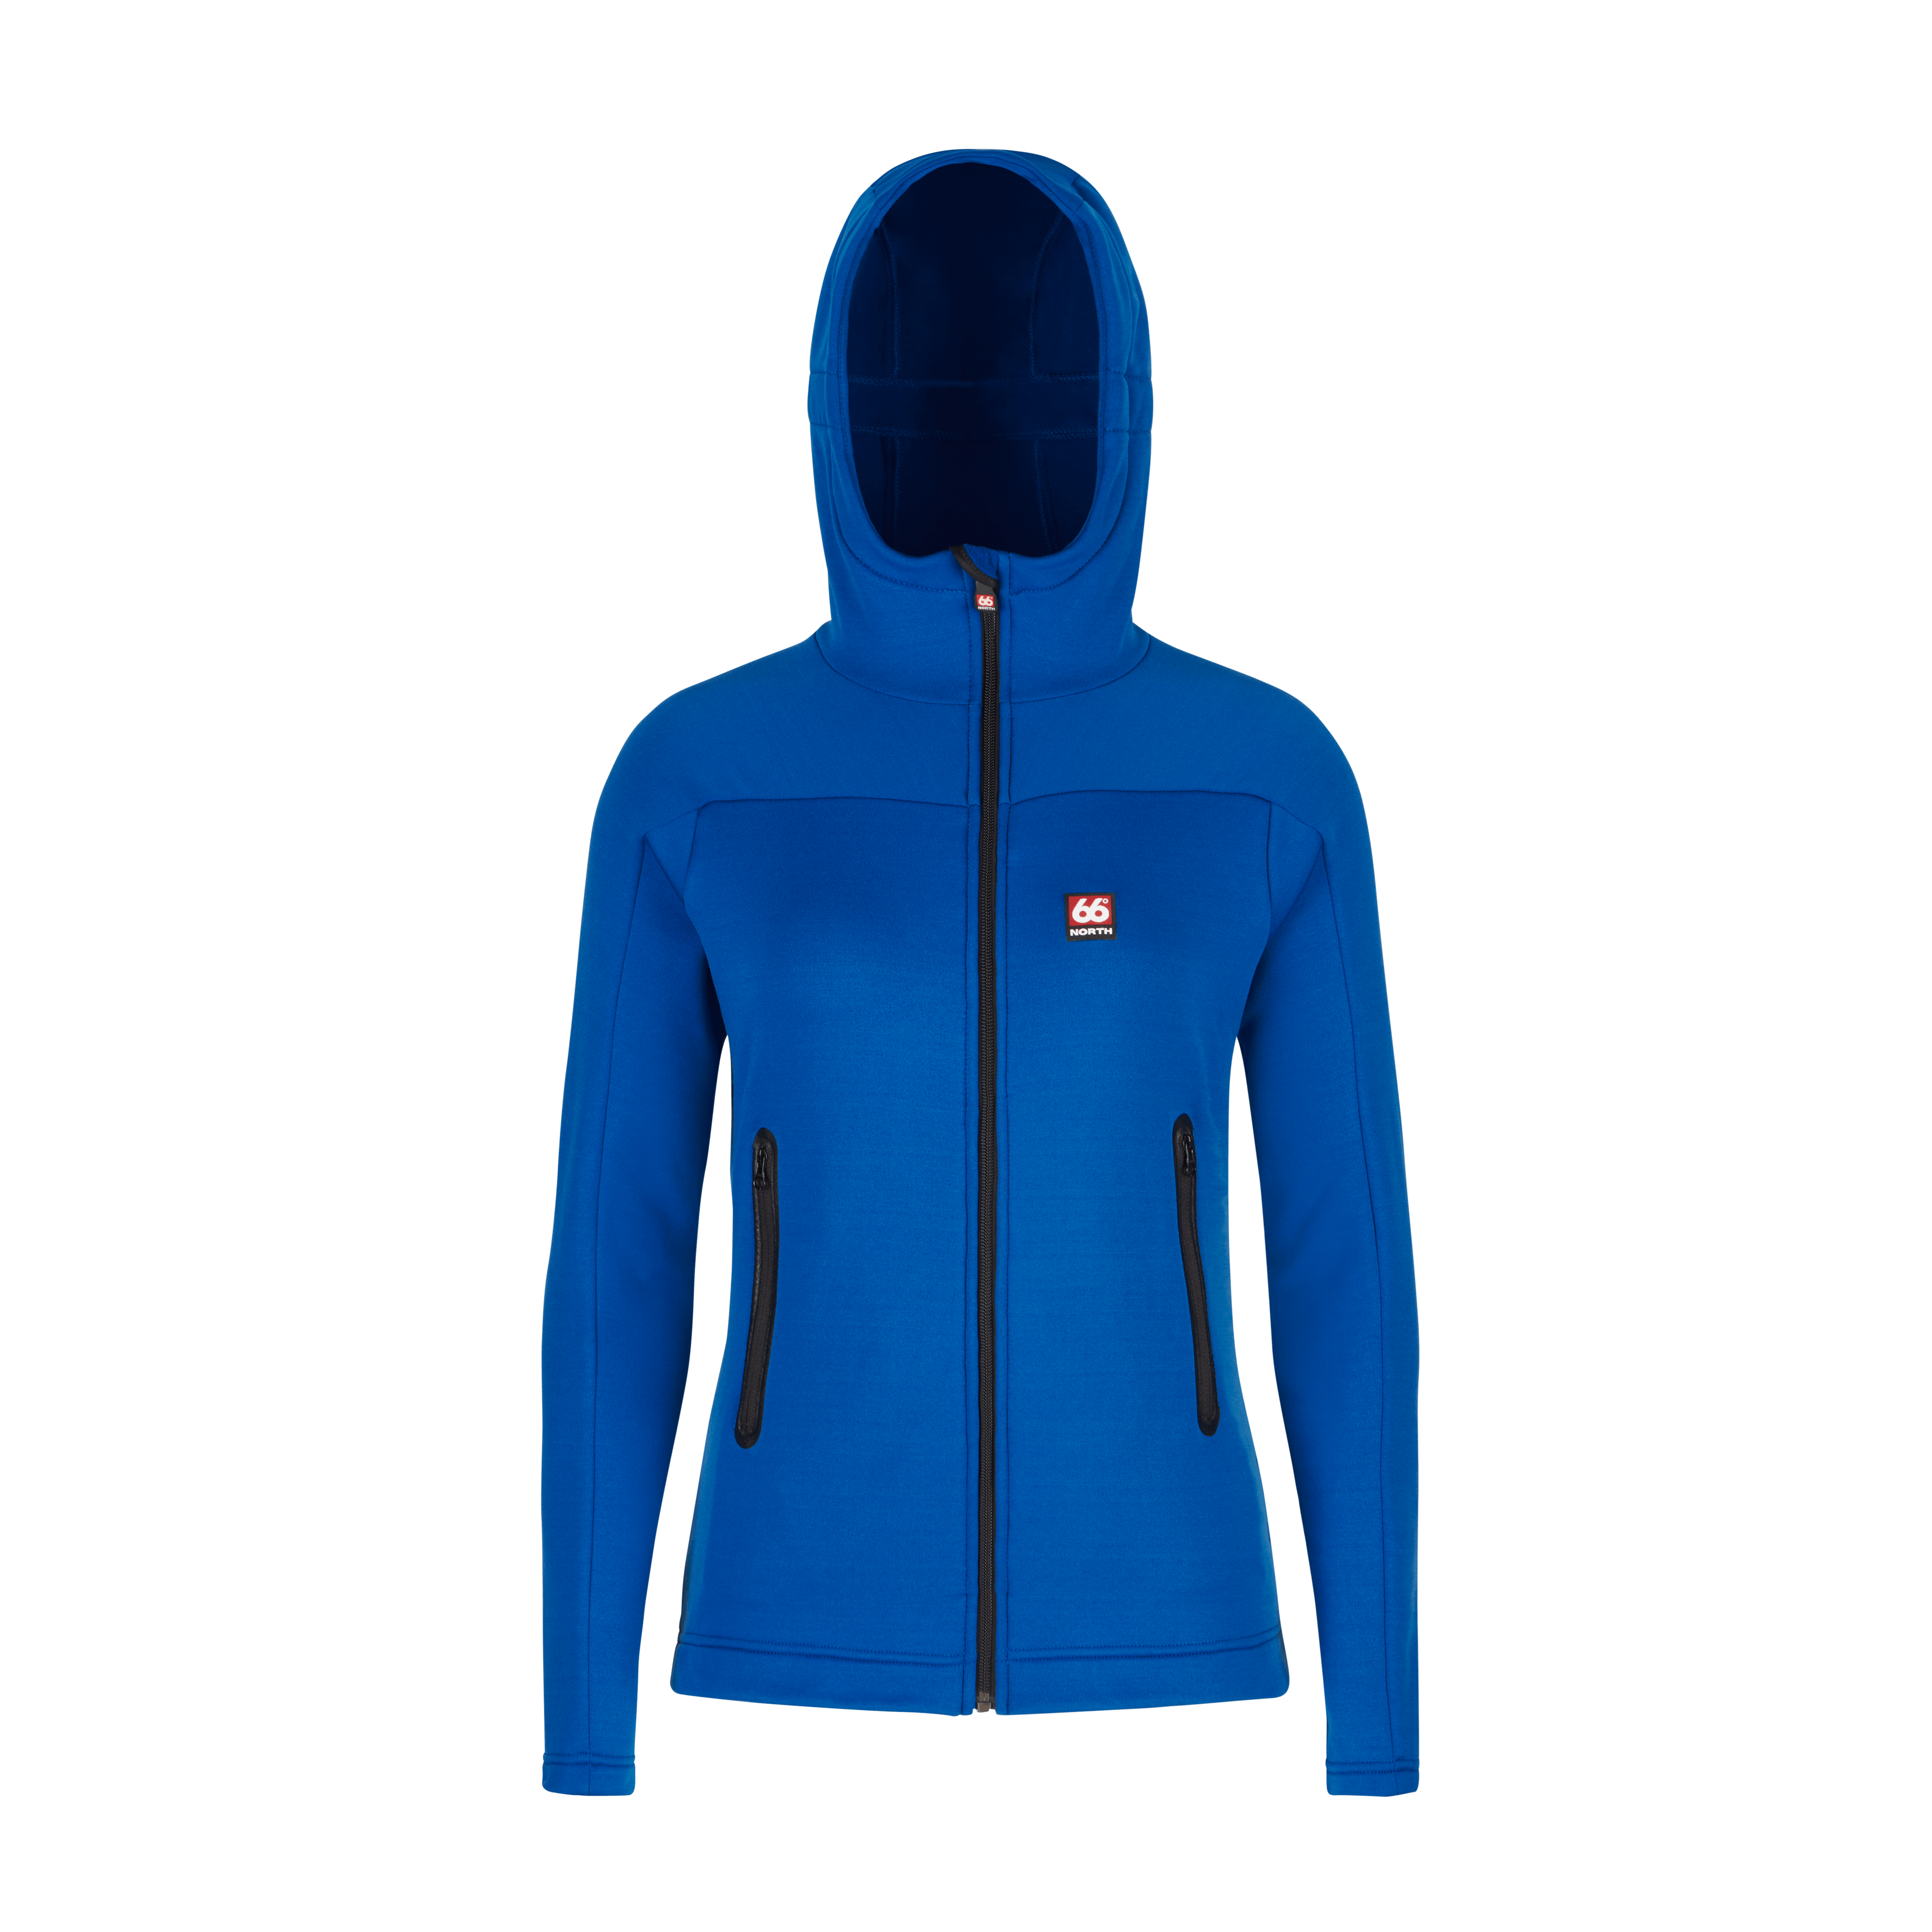 66 North Womens Snfell TopsandVests - Classic Blue - M